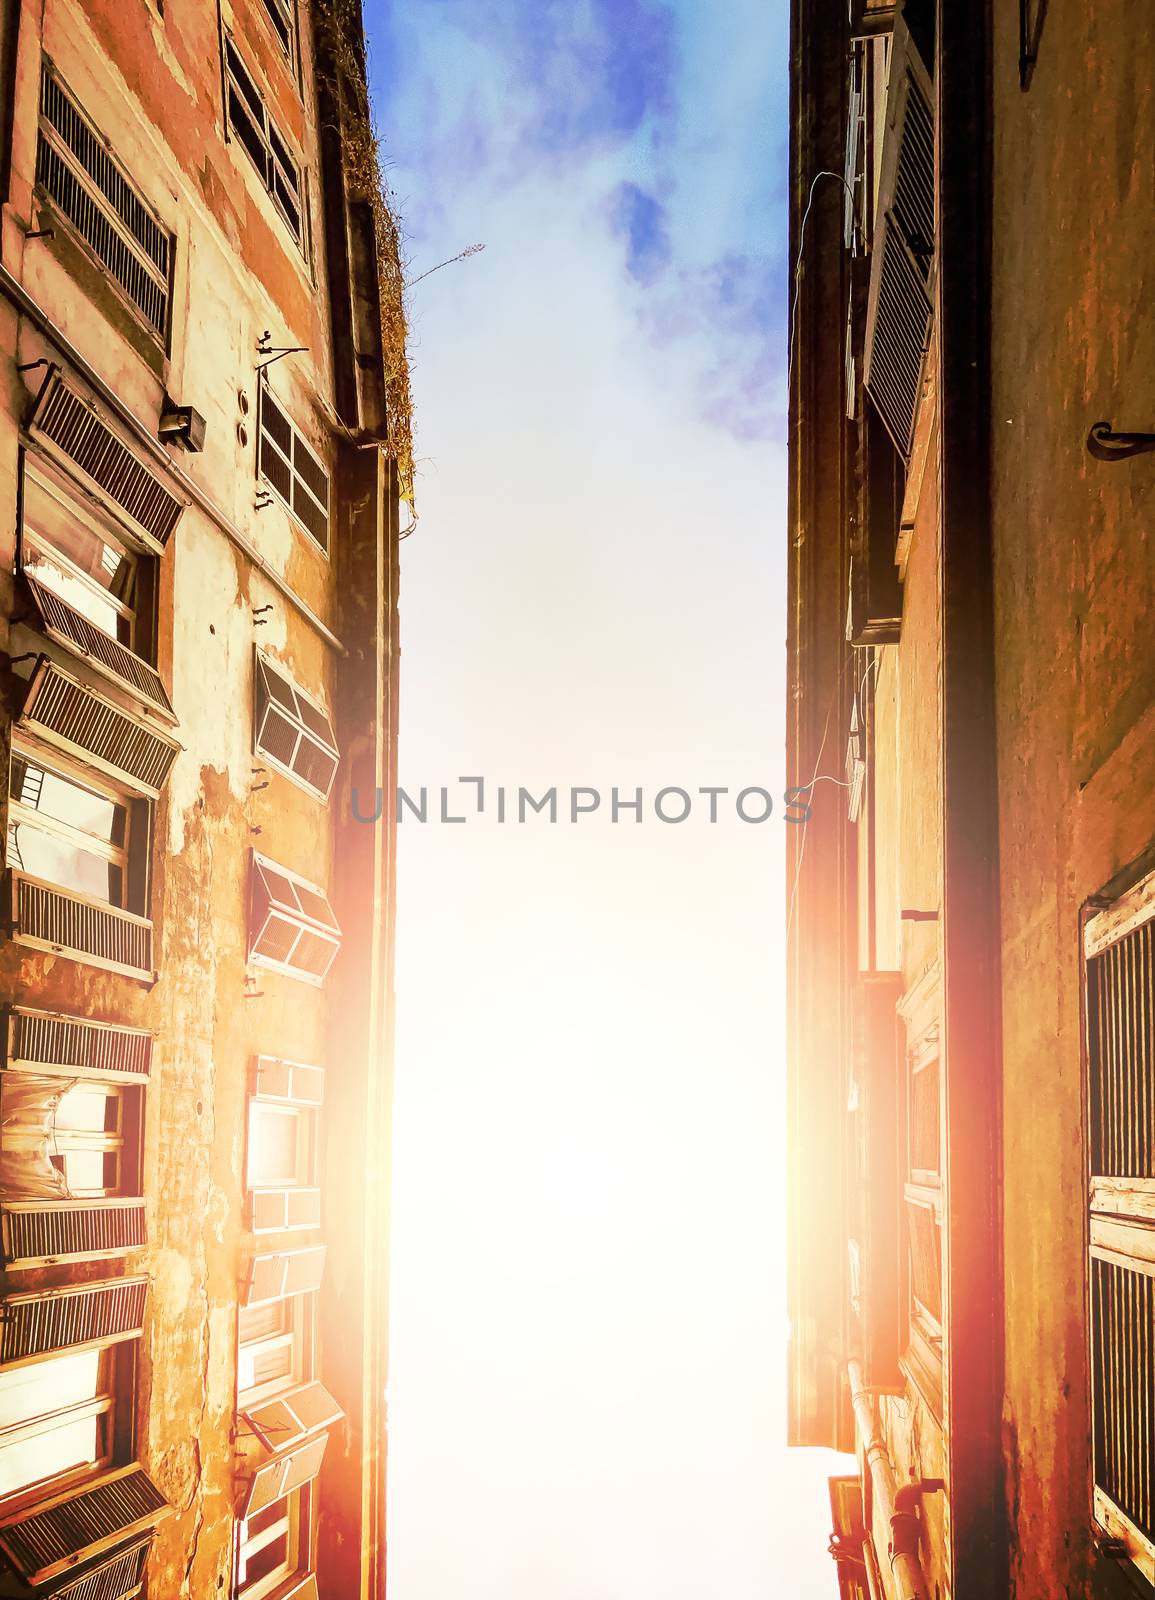 illuminated cloudy sky of the sun seen through the ancient buildings of an alley in Rome during the day. Bottom view with upward perspective.